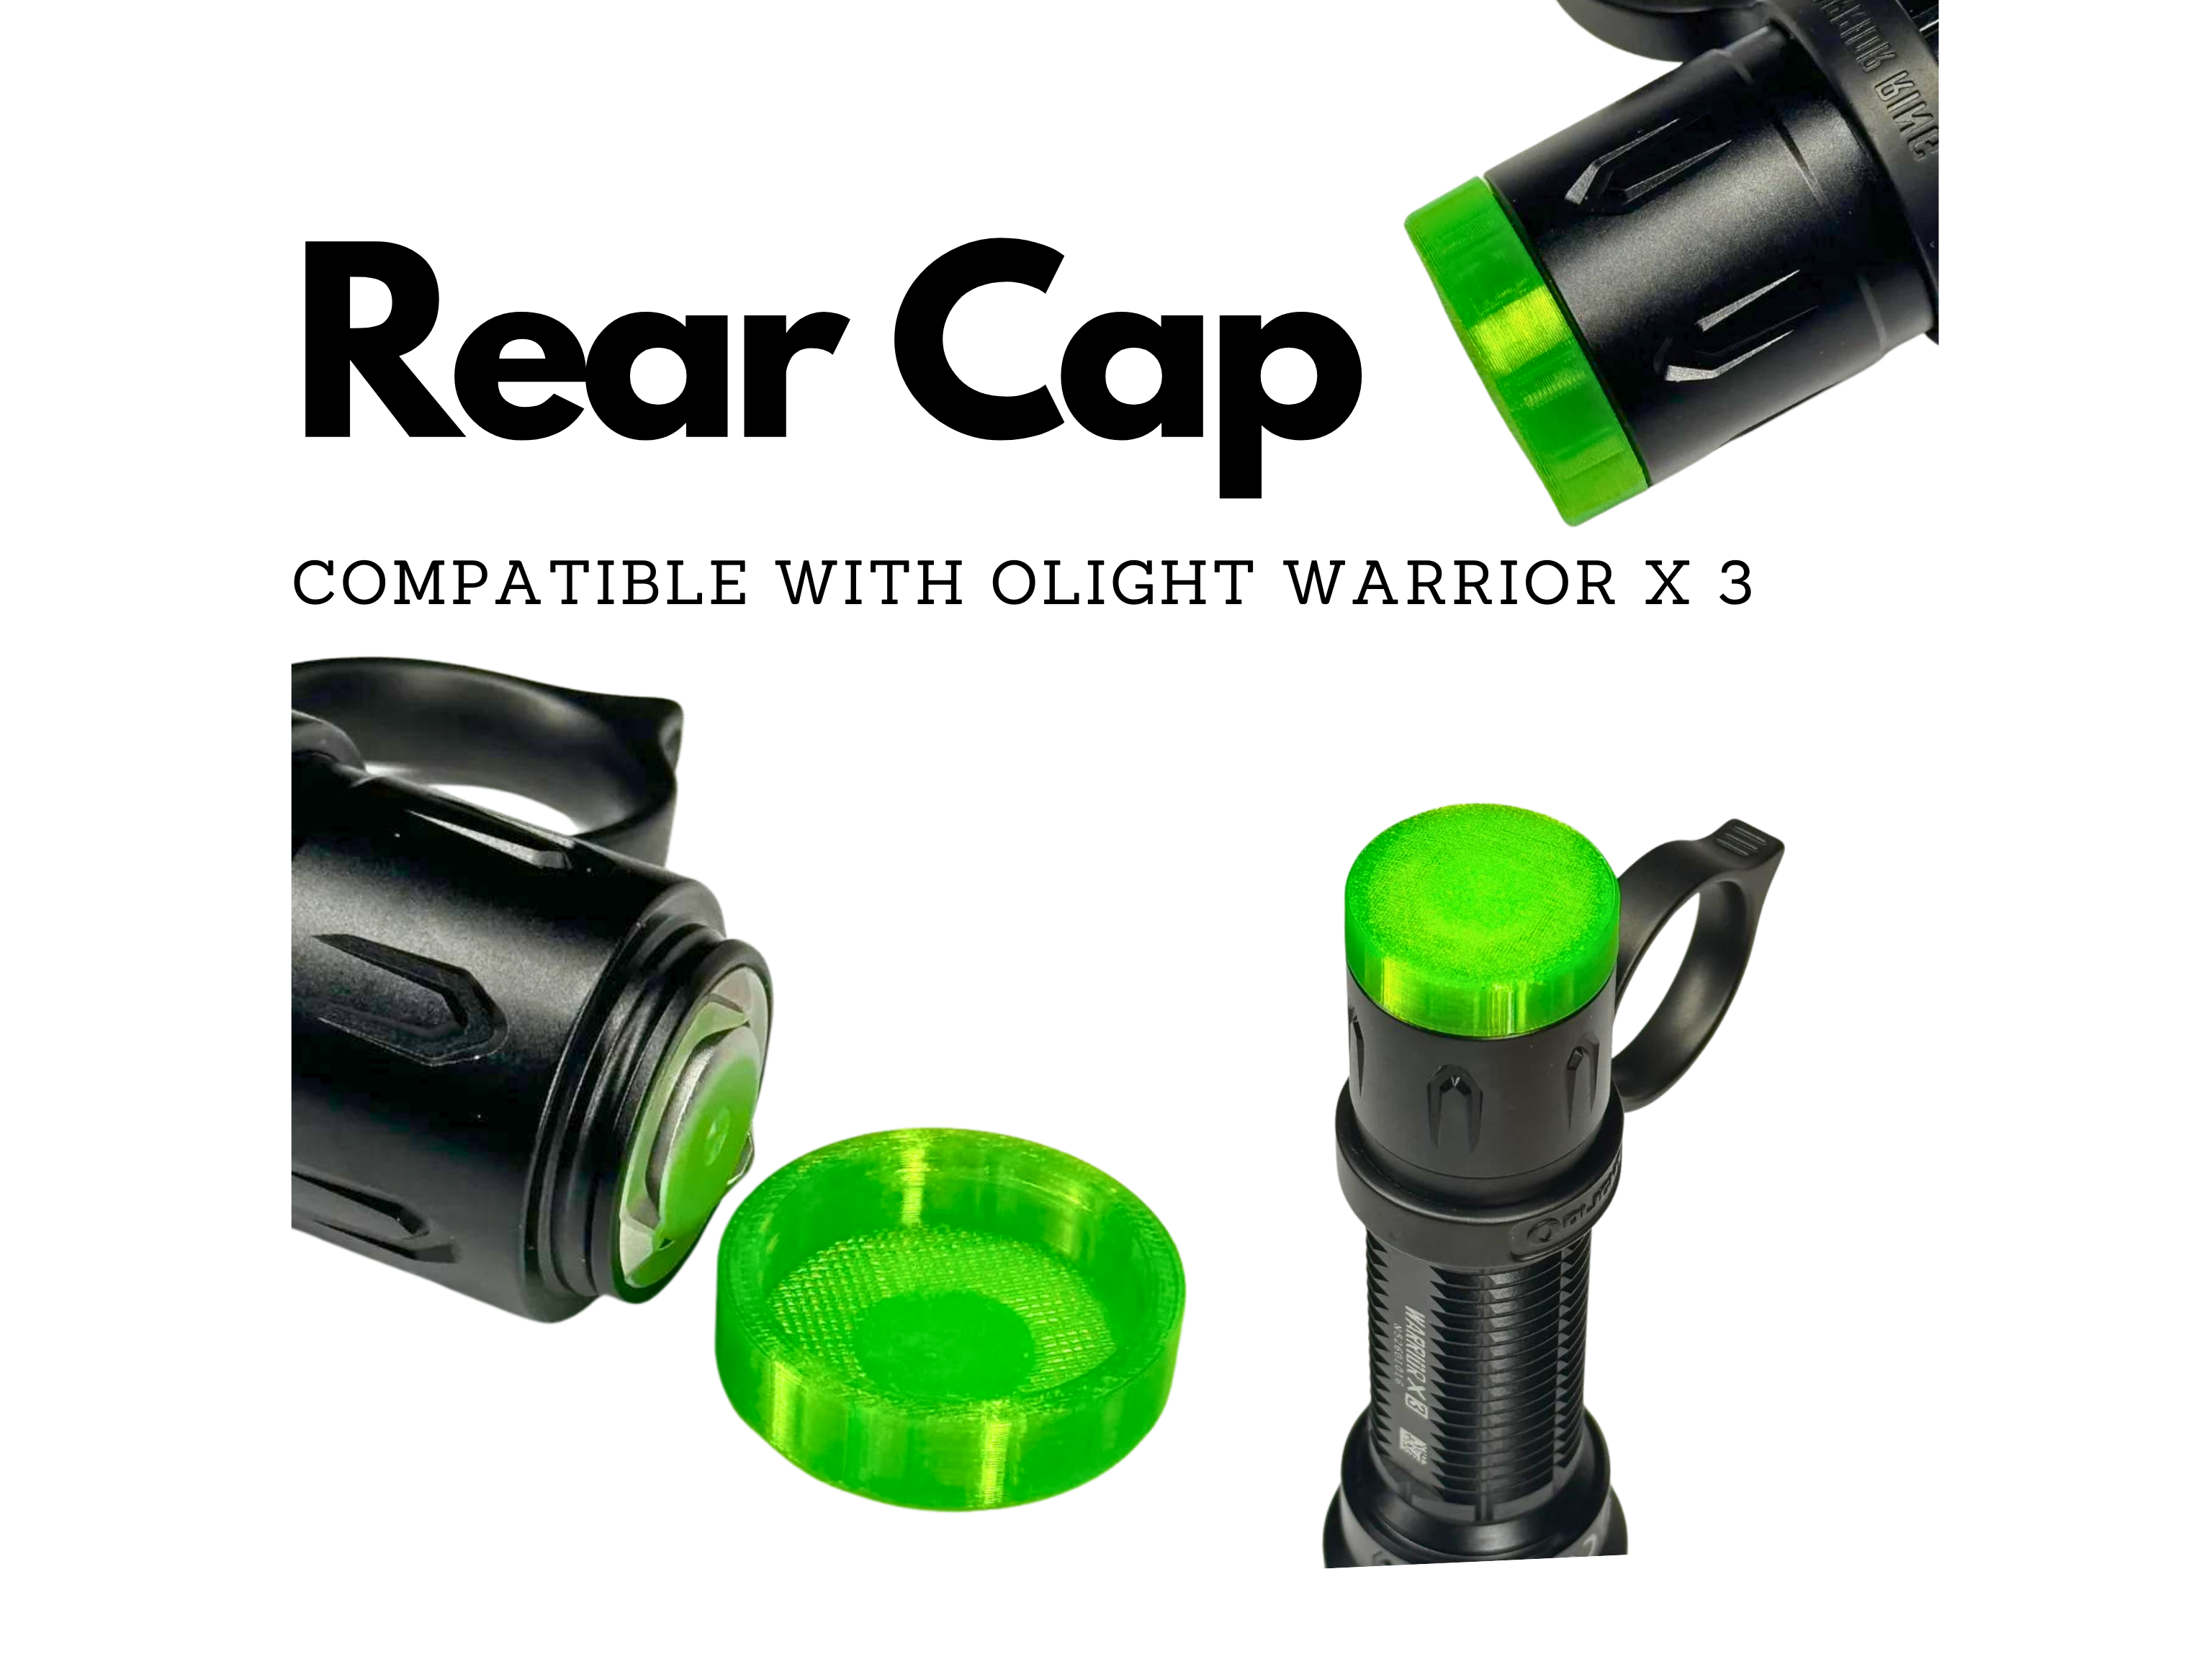 Rear cap compatible with Olight Warrior X 3